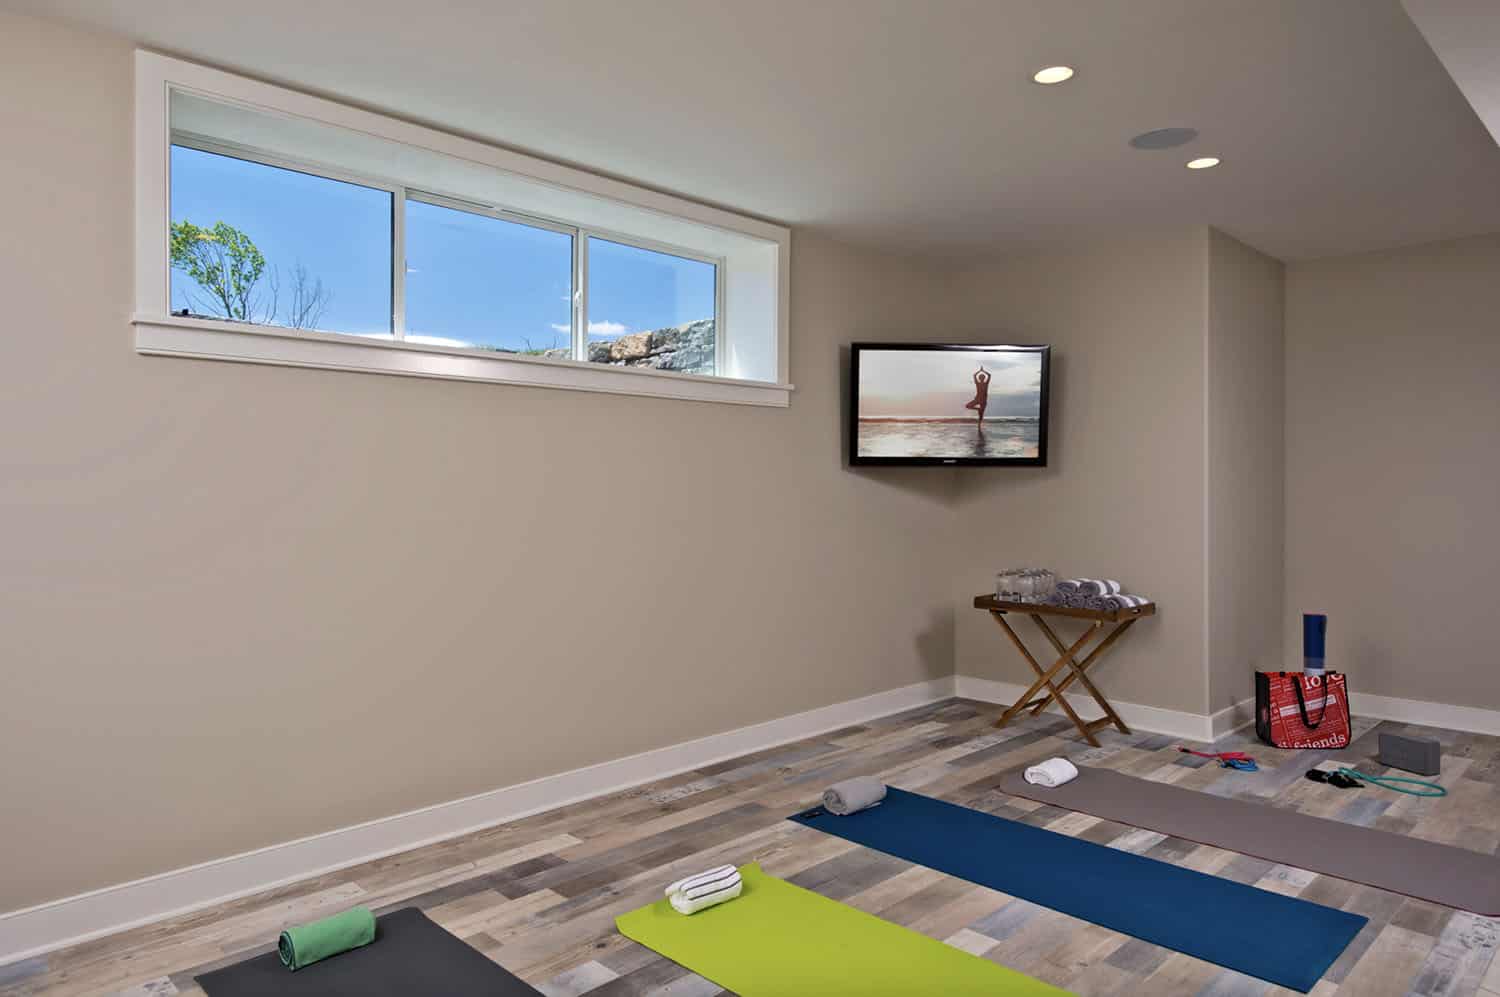 transitional-home-gym